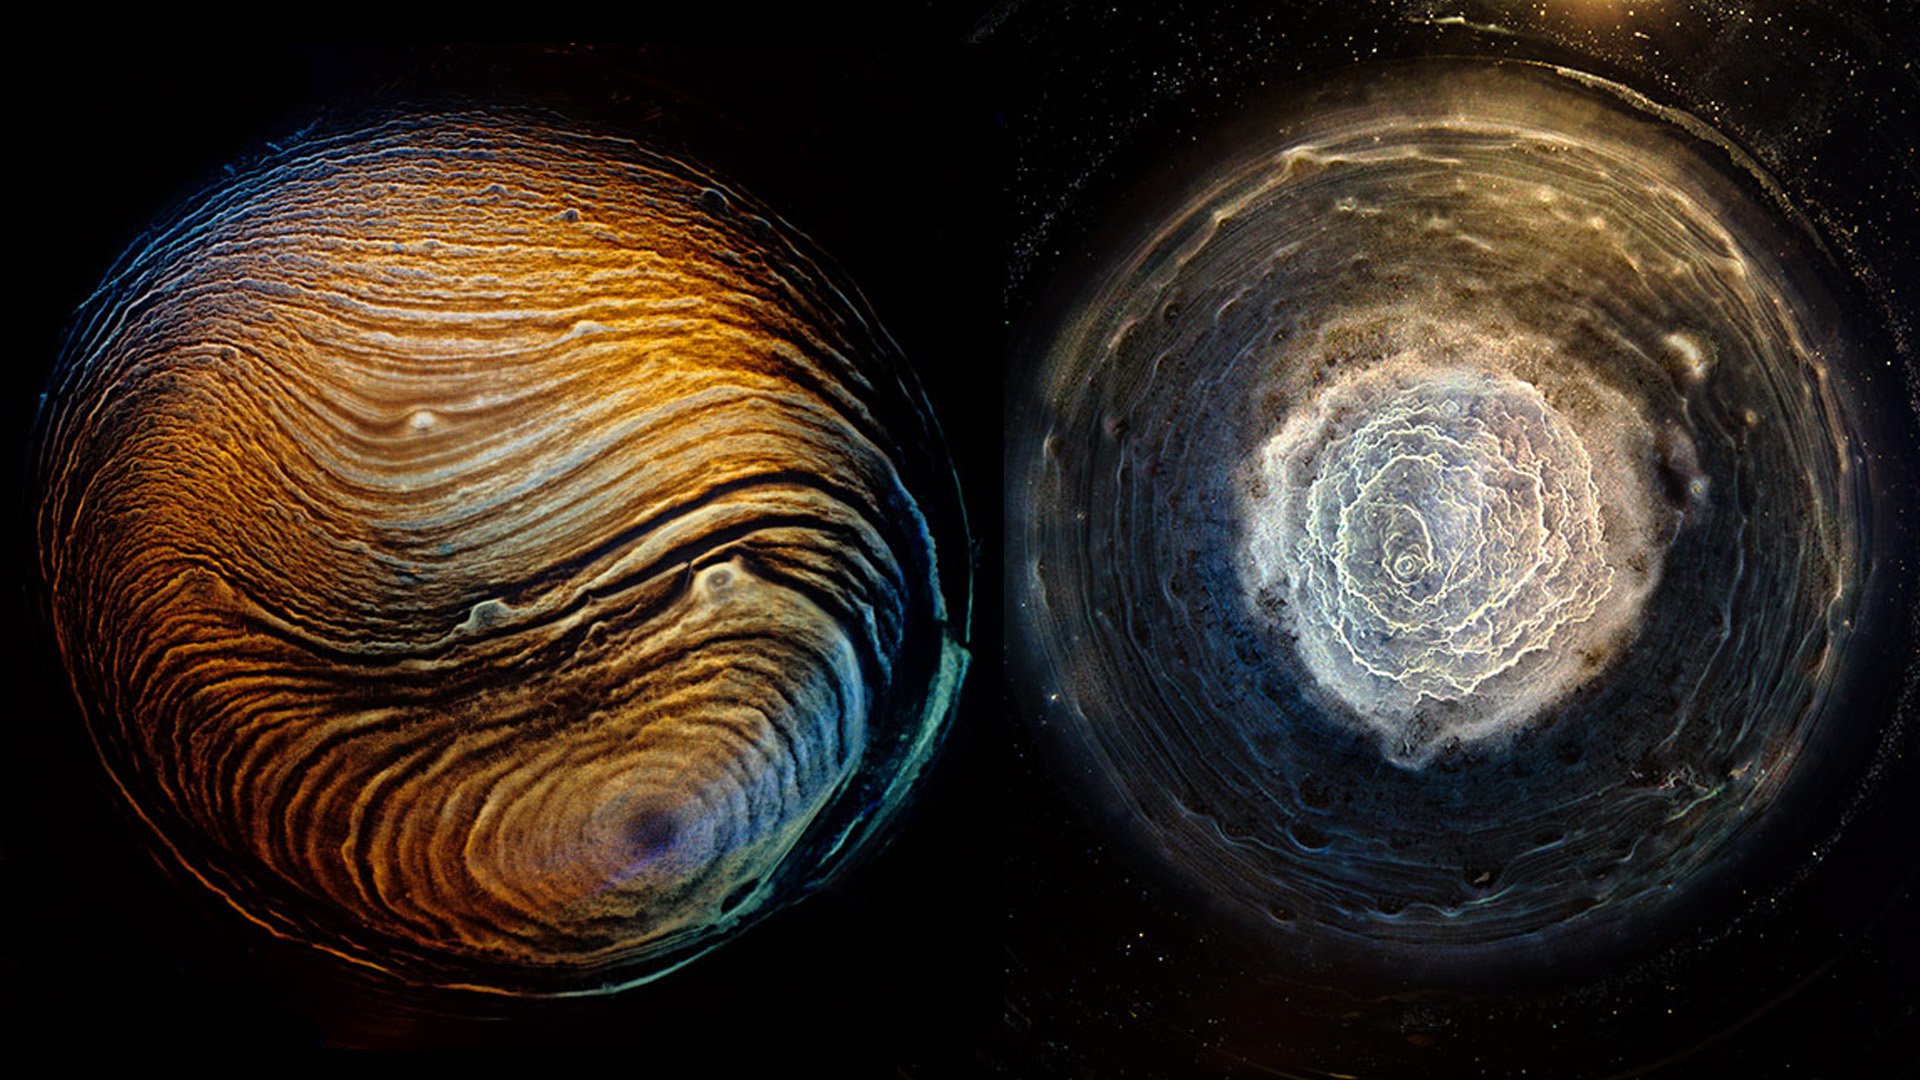 No, these aren’t photos of distant planets – they’re dried whisky remains